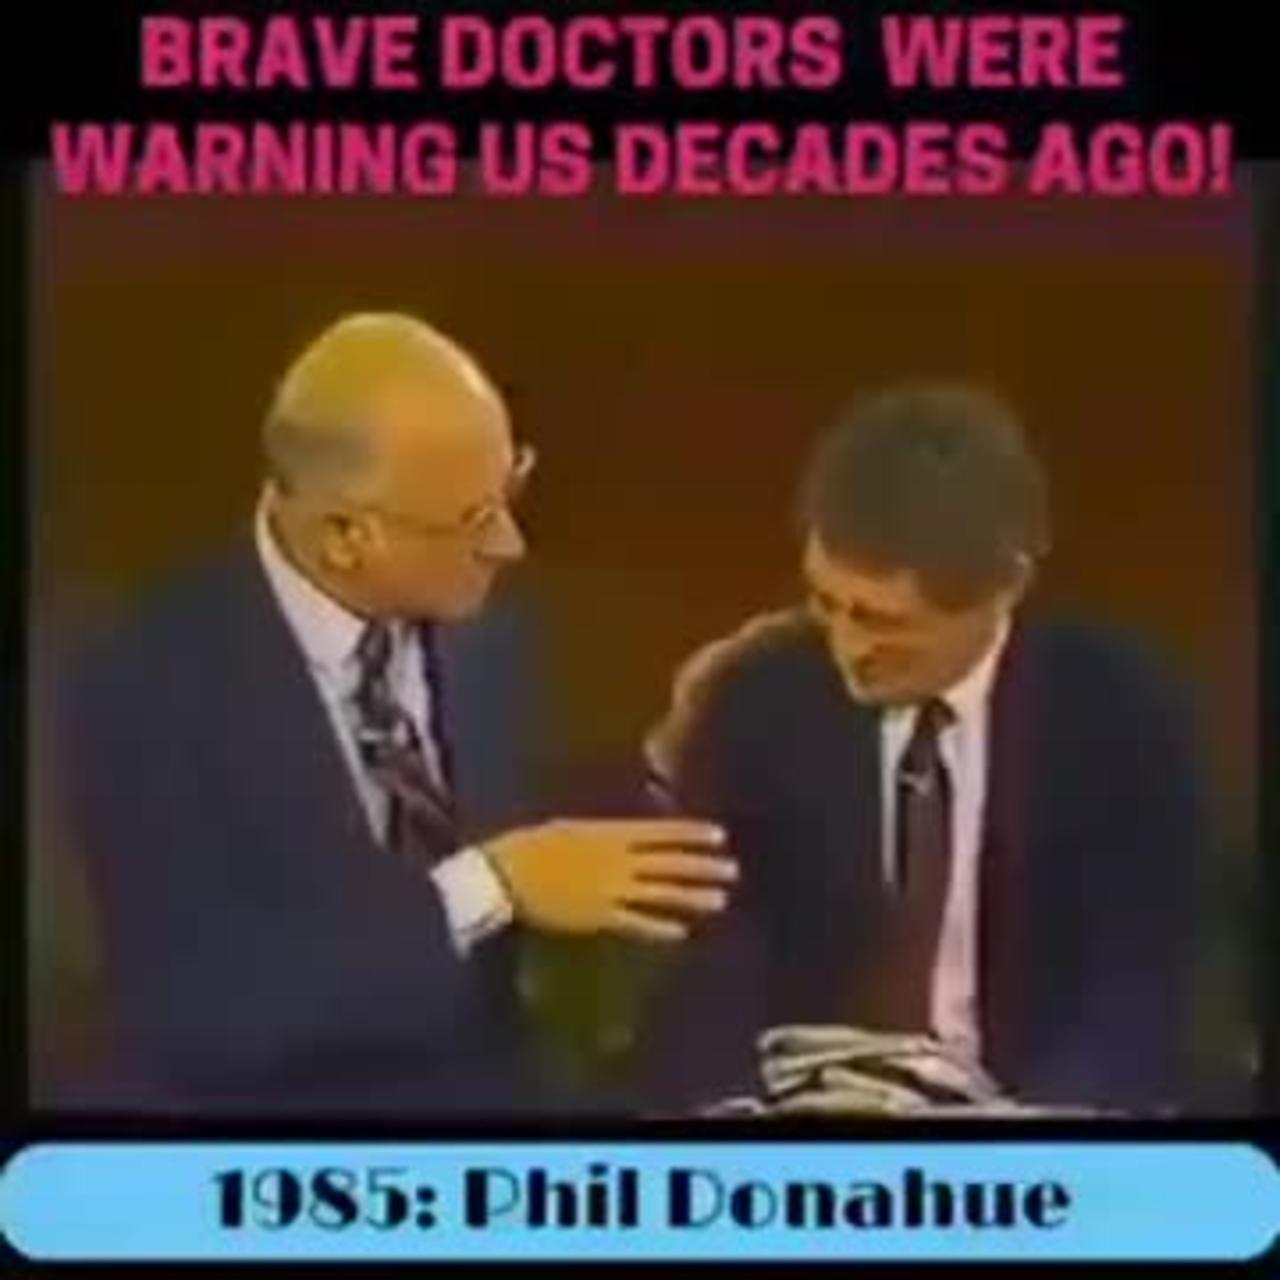 This was filmed in 1985, the year before vaccines became liability free